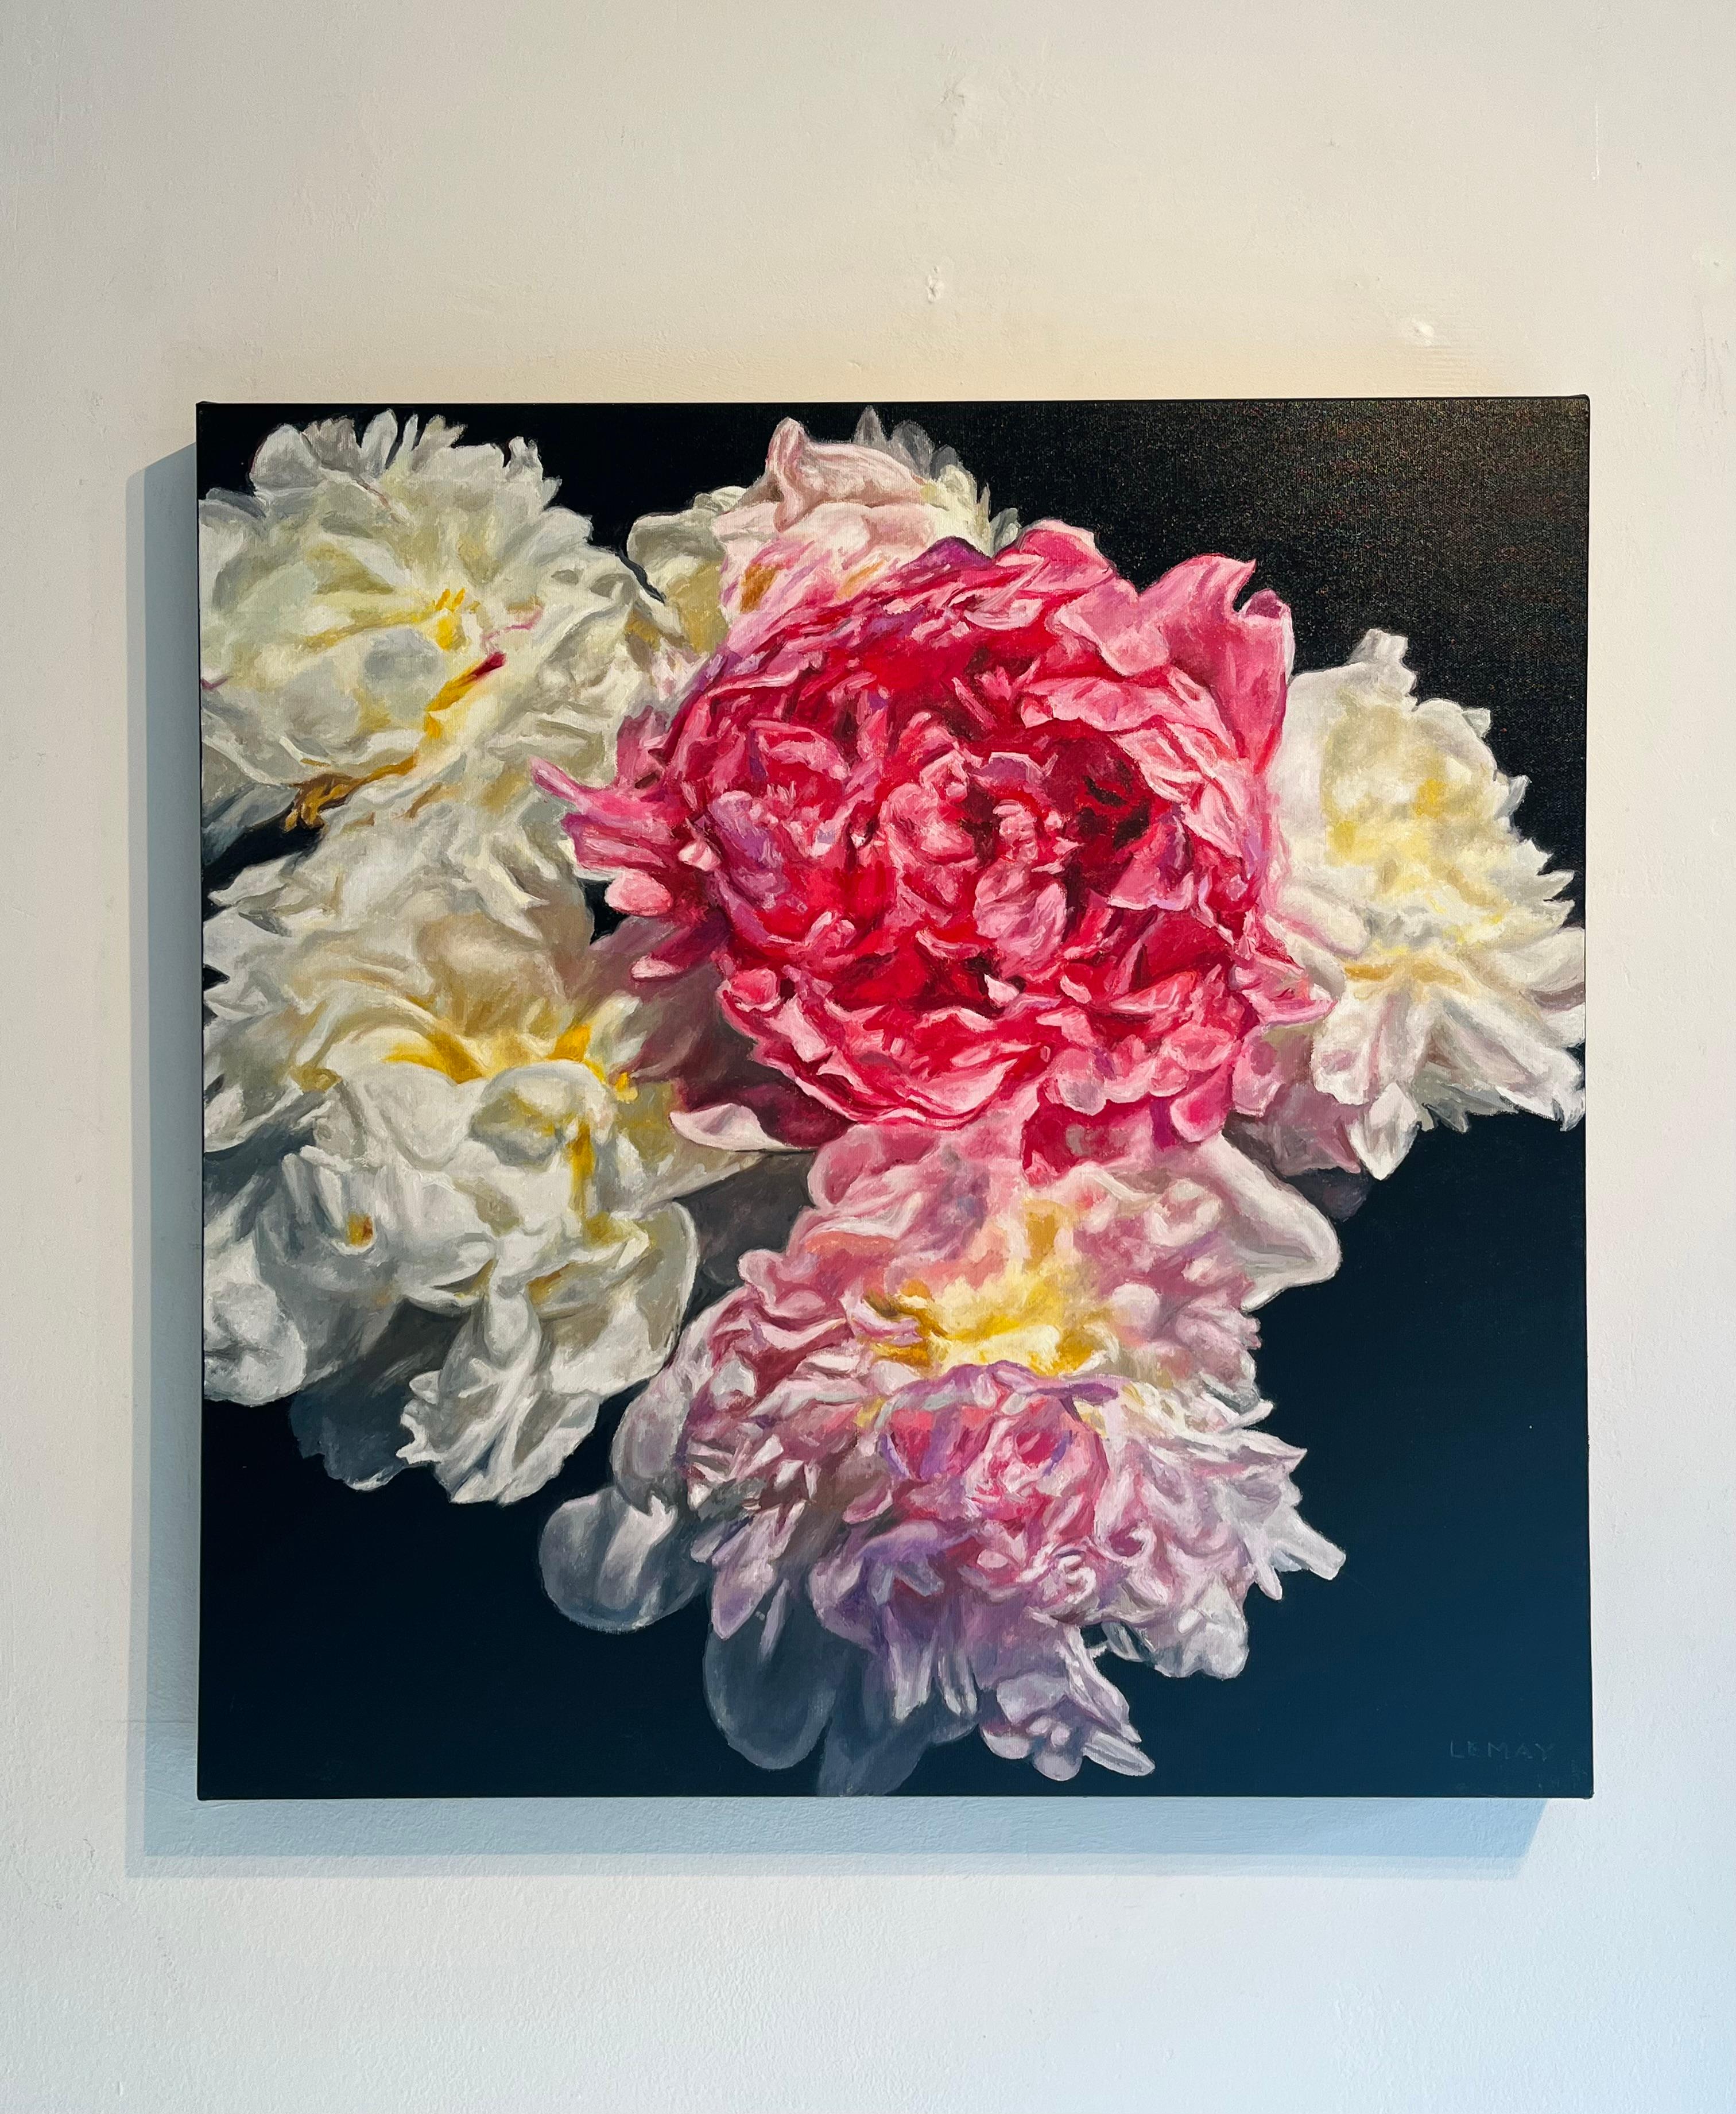 Pink and White Peonies-original modern realism floral painting-contemporary Art - Painting by Robert Lemay